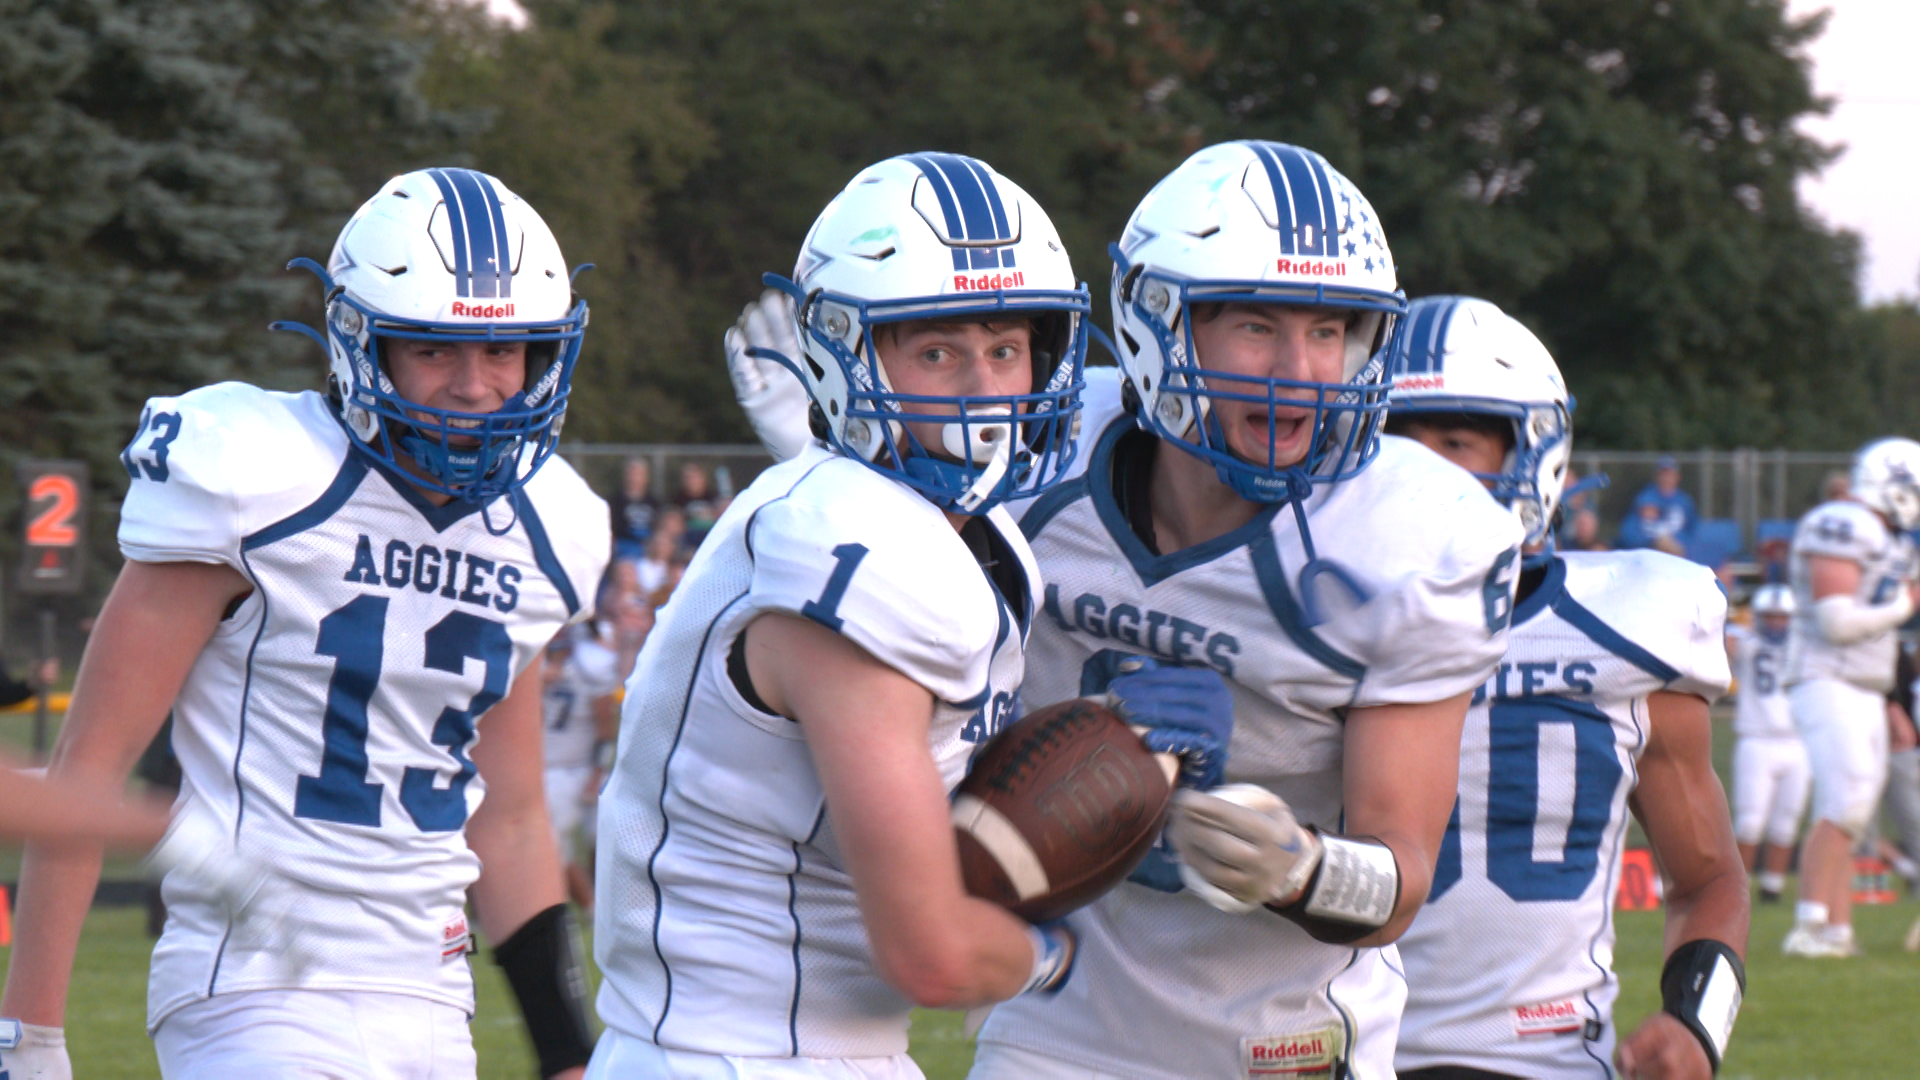 Beal City is ranked third in the latest Division 8 state football rankings.